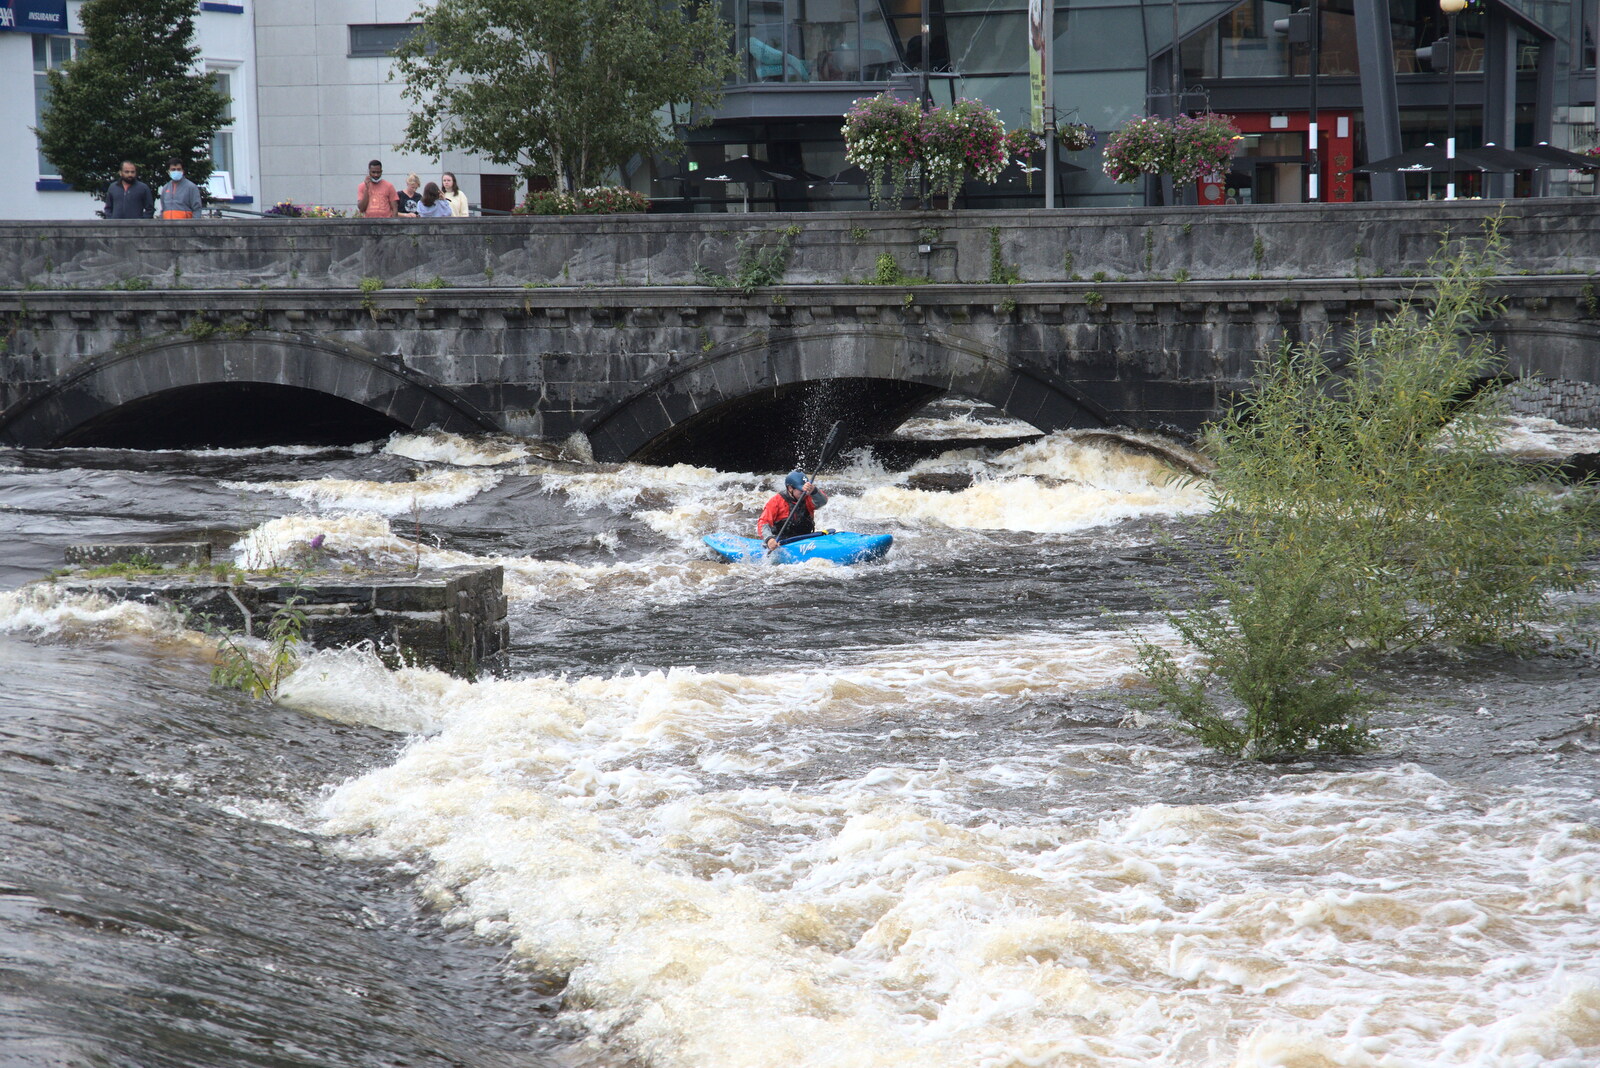 Pints of Guinness and Streedagh Beach, Grange and Sligo, Ireland - 9th August 2021: Some insaniac is actually kayaking the river